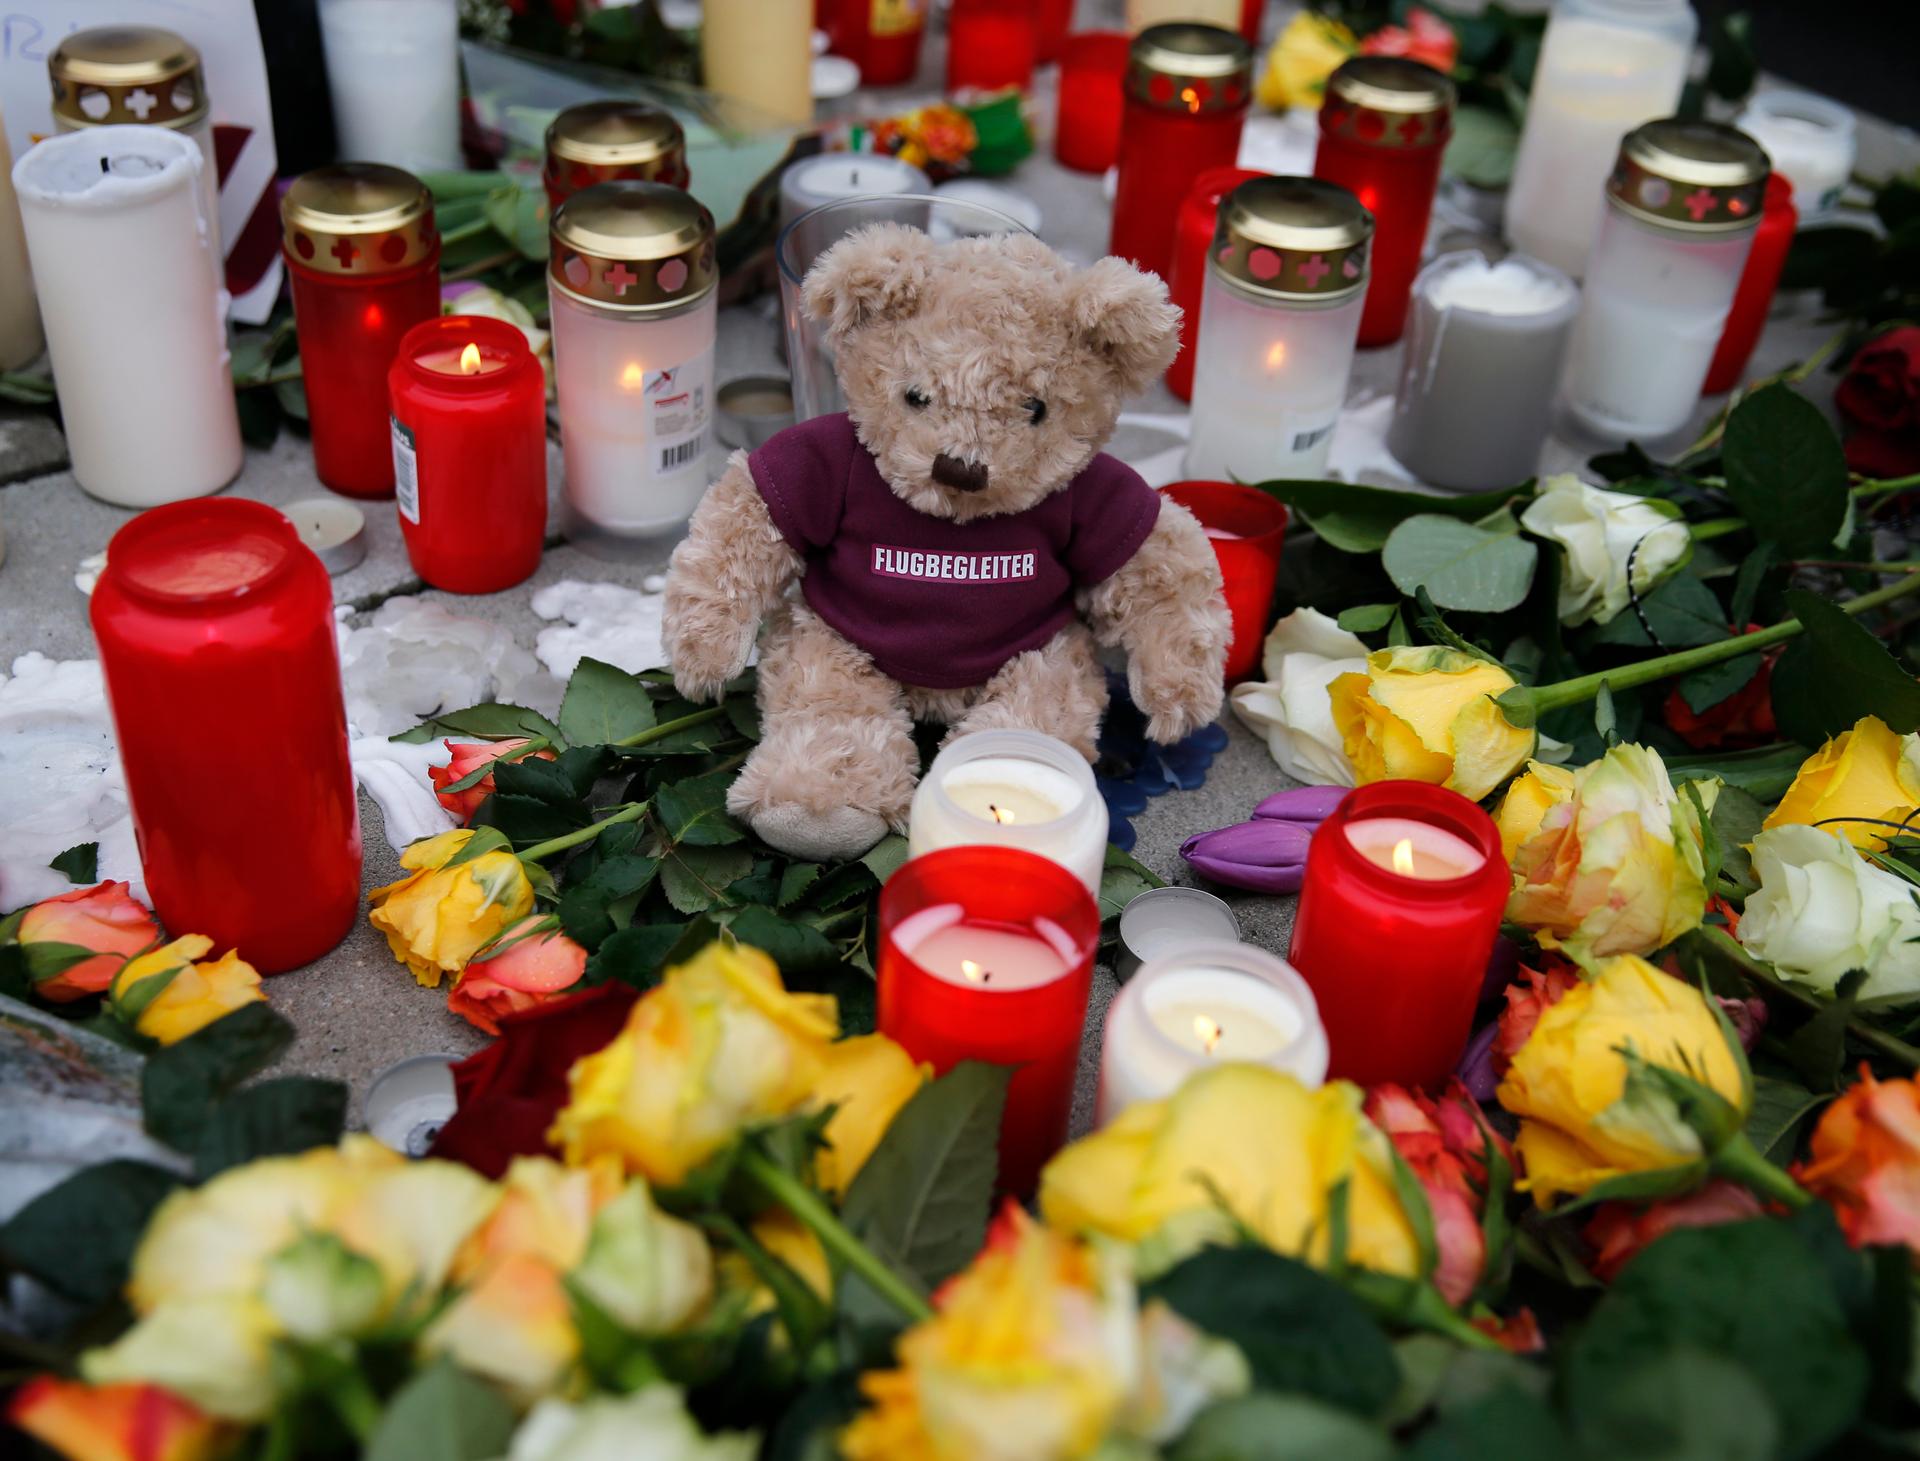 A teddy bear wearing a shirt with the word "flight attendant" is placed between flowers and candles outside Germanwings headquarters at the Cologne Bonn airport on March 25, 2015.